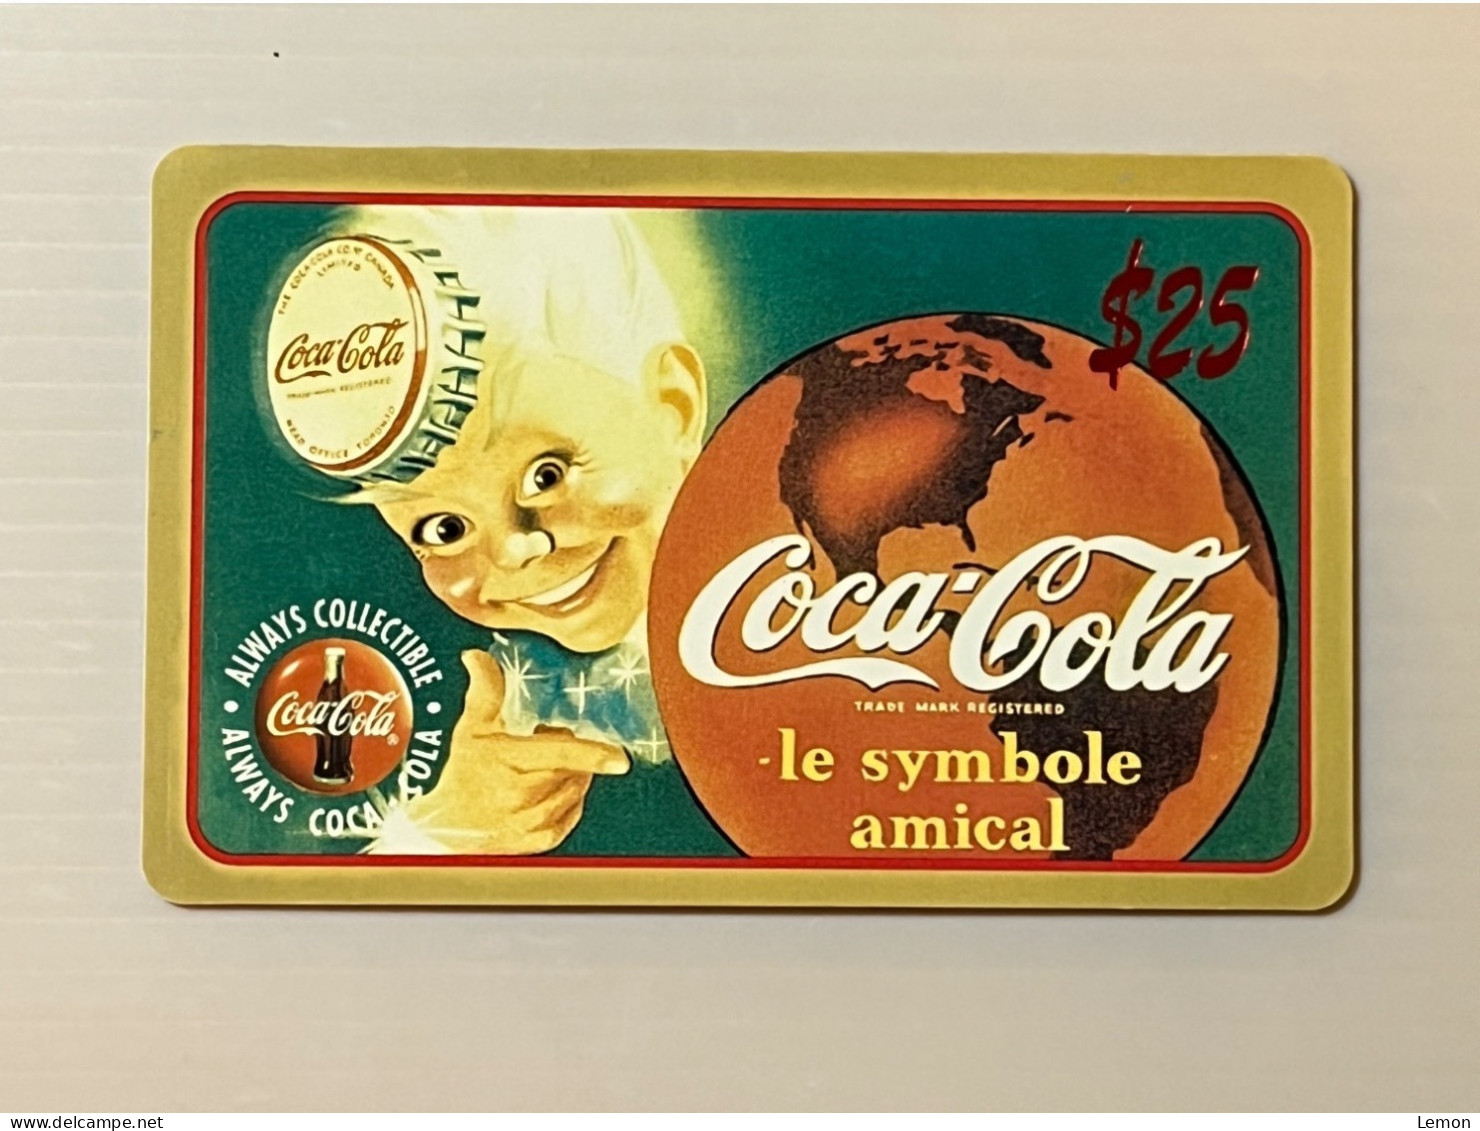 Mint USA UNITED STATES America Prepaid Telecard Phonecard, Coca Cola Boy $25 Card Gold Border, Set Of 1 Mint Card - Collections